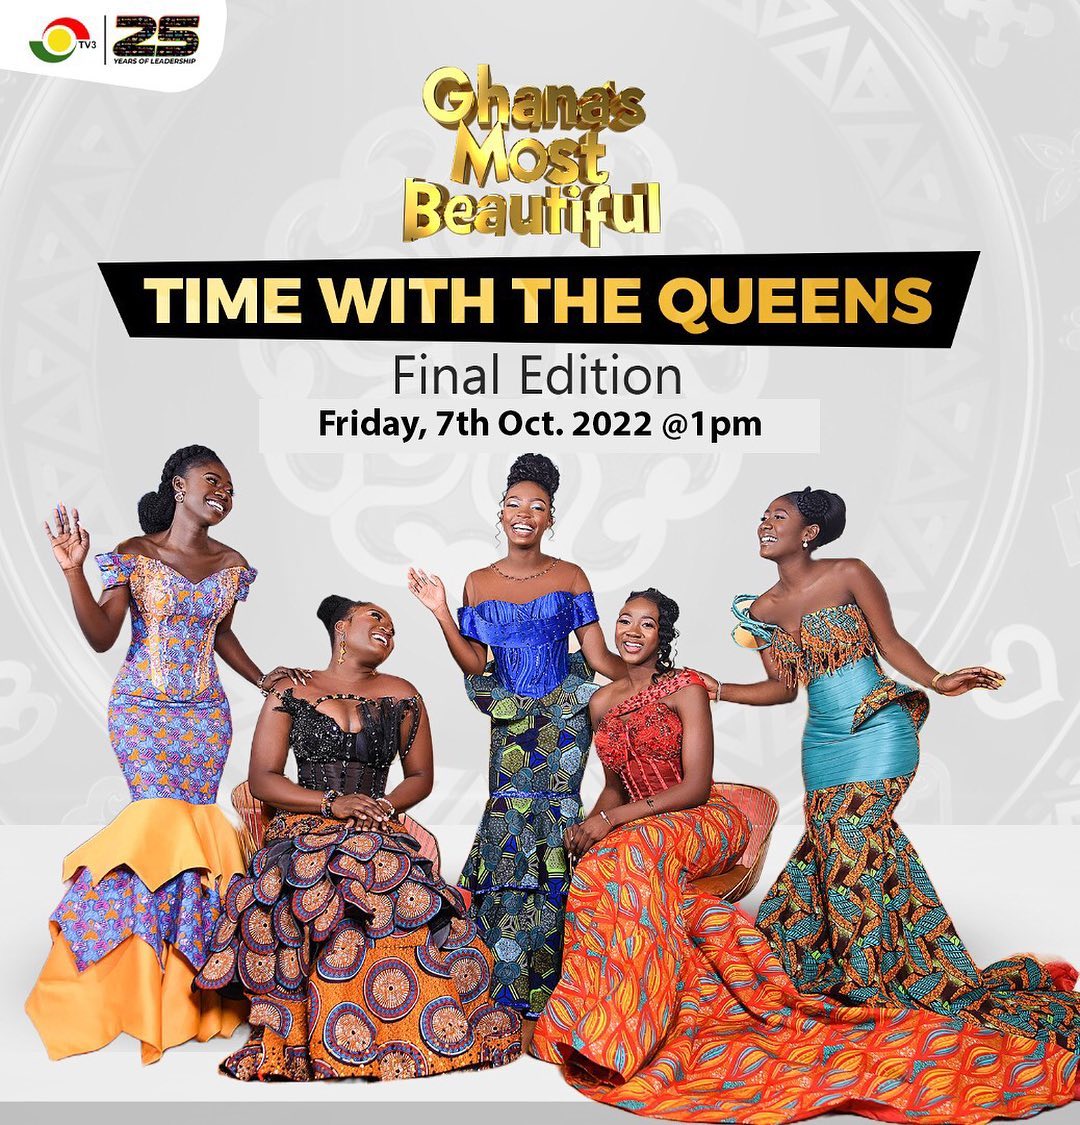 GMB 2022: Predictions For 2022 Ghana's Most Beautiful Pageant Finale